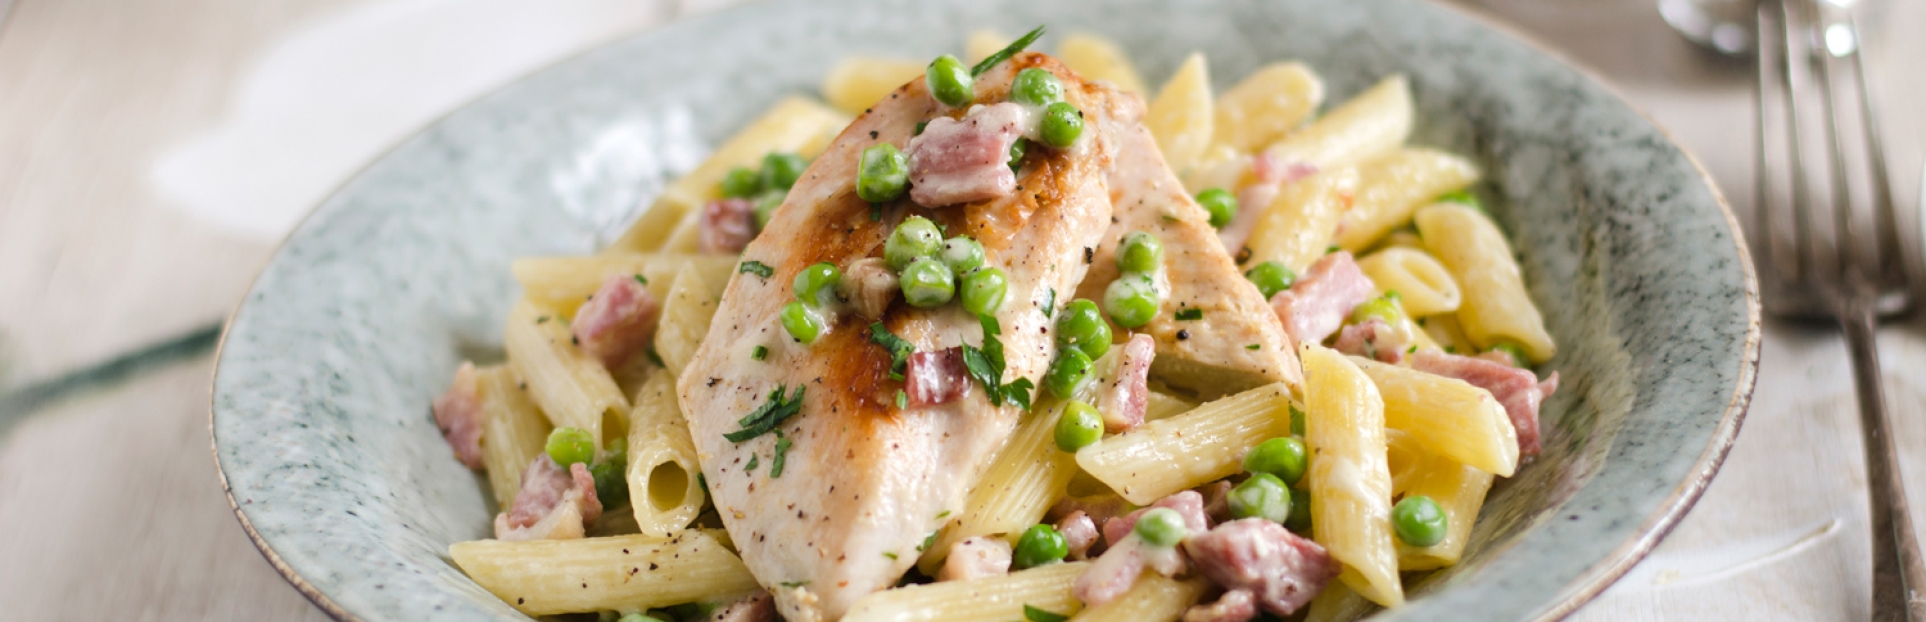 image of chicken with creamy bacon penne pasta in a bowl